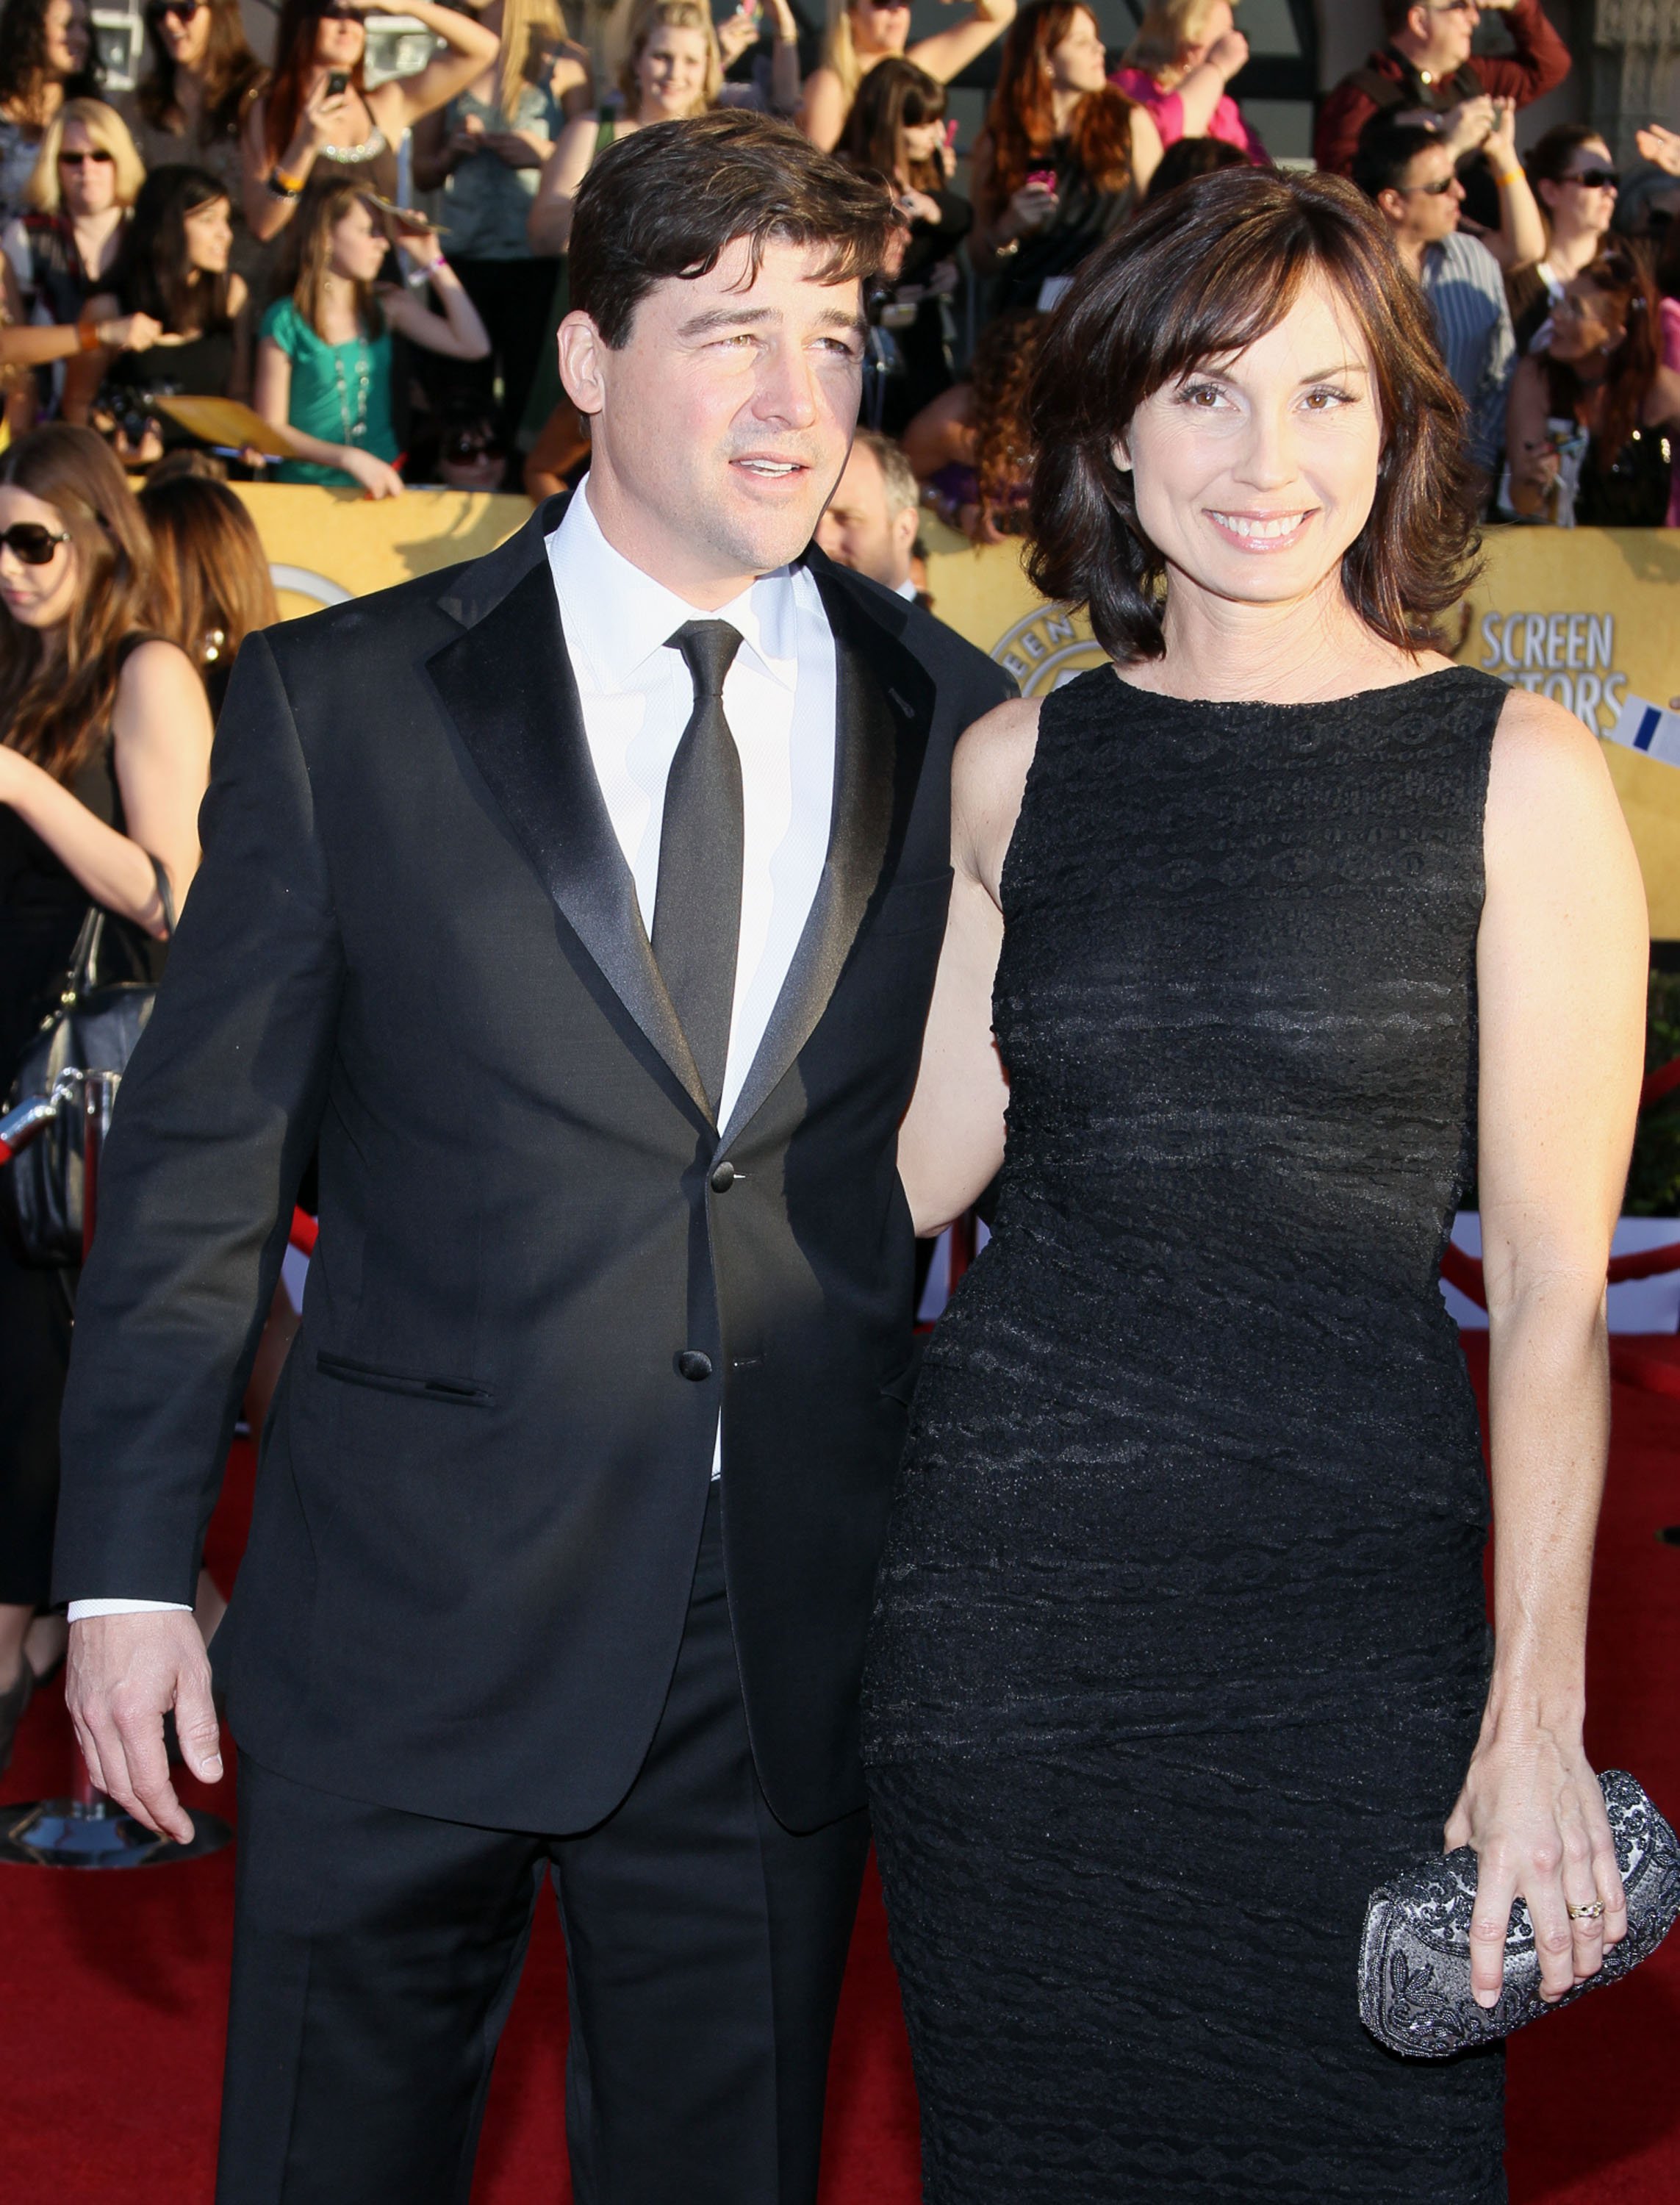 Kyle Chandler and Kathryn Chandler at The 18th Annual Screen Actors Guild Awards on January 29, 2012, in Los Angeles, California. | Source: Getty Images